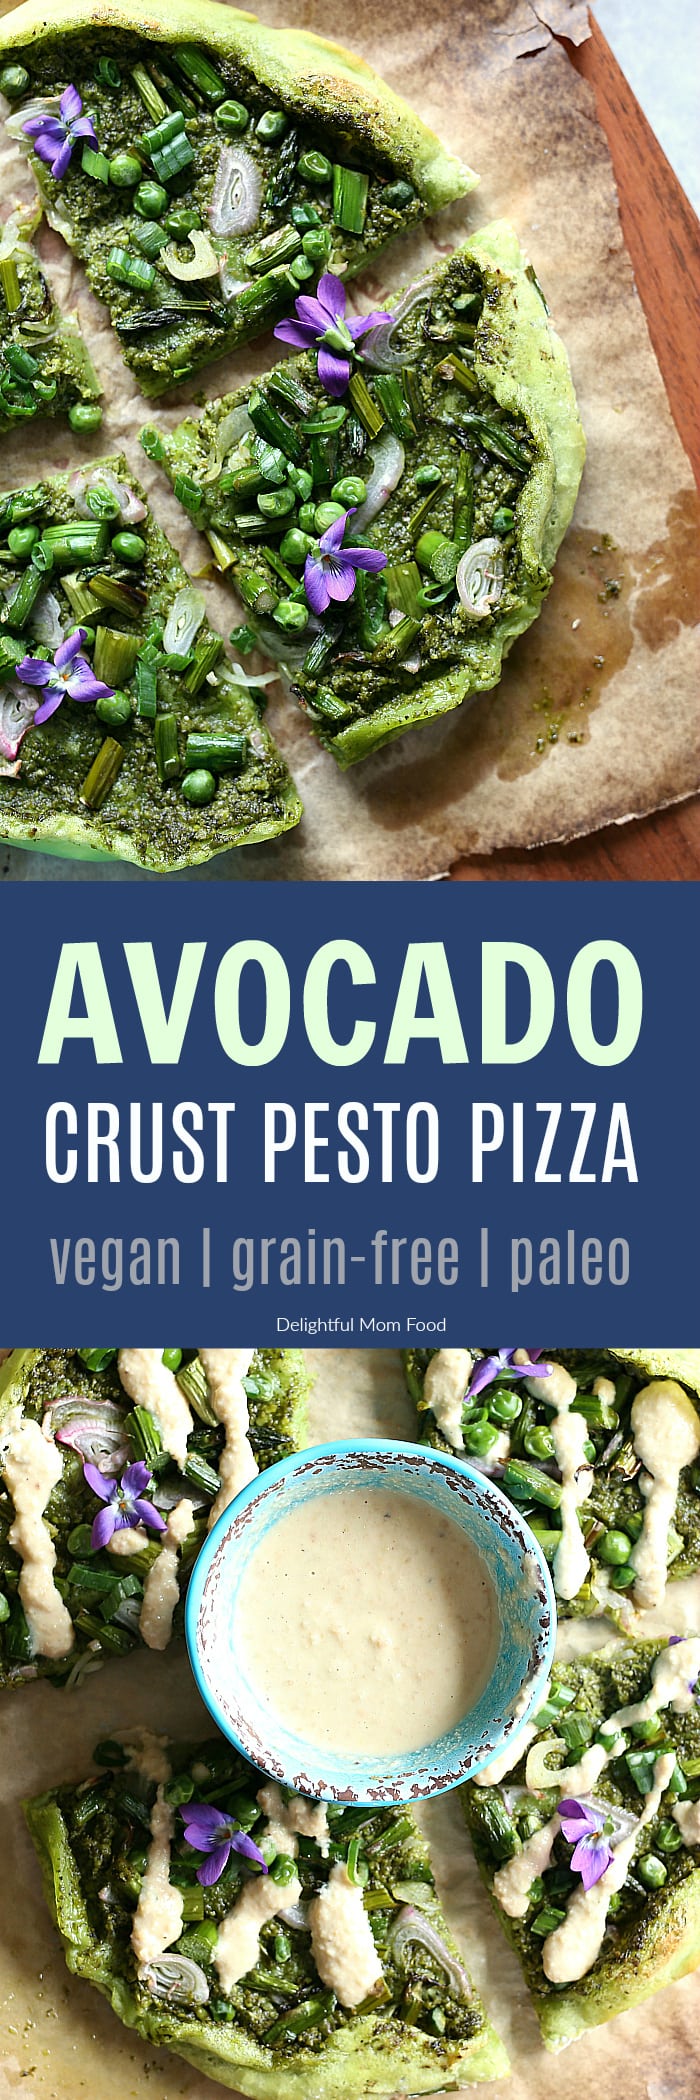 Get your greens with this healthy, grain-free, vegan avocado pizza crust made with lots of greens on top! Basil pea pesto, asparagus, peas and a cashew cheese dressing make this a light dinner or appetizer with plenty of delicious bold flavors! #avocado #pesto #pizza #recipe #healthy #easy #30minute #glutenfree #dairyfree #vegan #grainfree #paleo | Recipe at delightfulmomfood.com